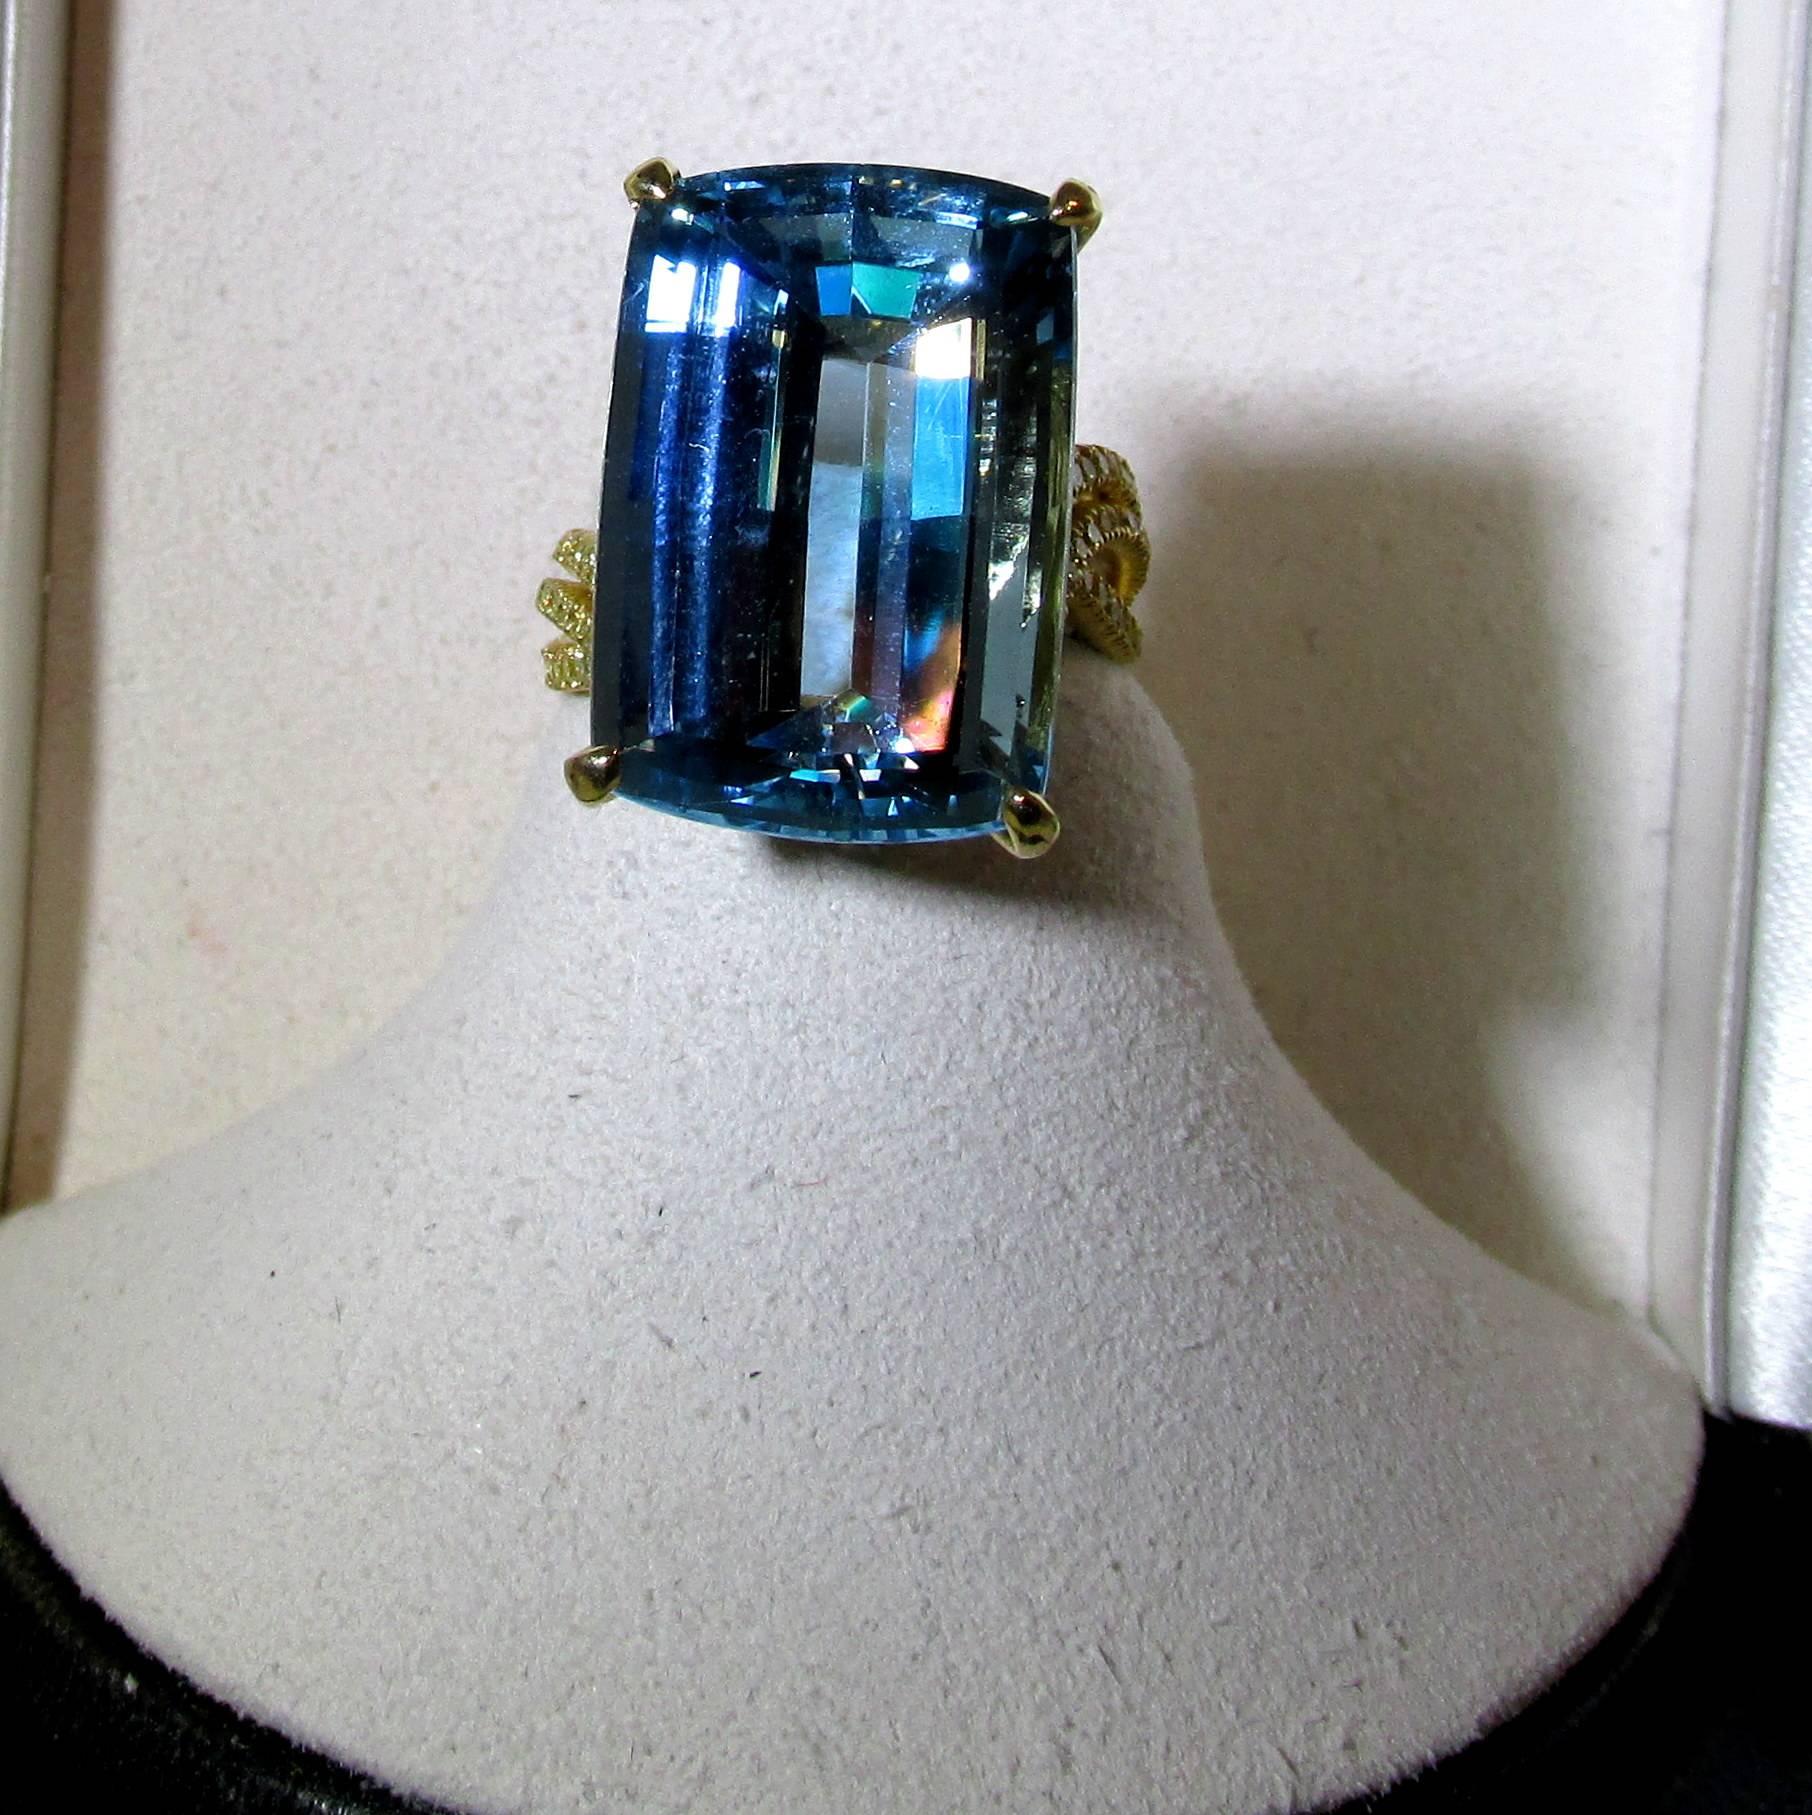 18k unusual asymmetrical hand made ring micro pave set with 195 small round natural fancy intense diamonds  weighing approx. 1 ct.,and possessing a center fine natural bright blue aquamarine.  The aquamarine displays an even blue color with no green